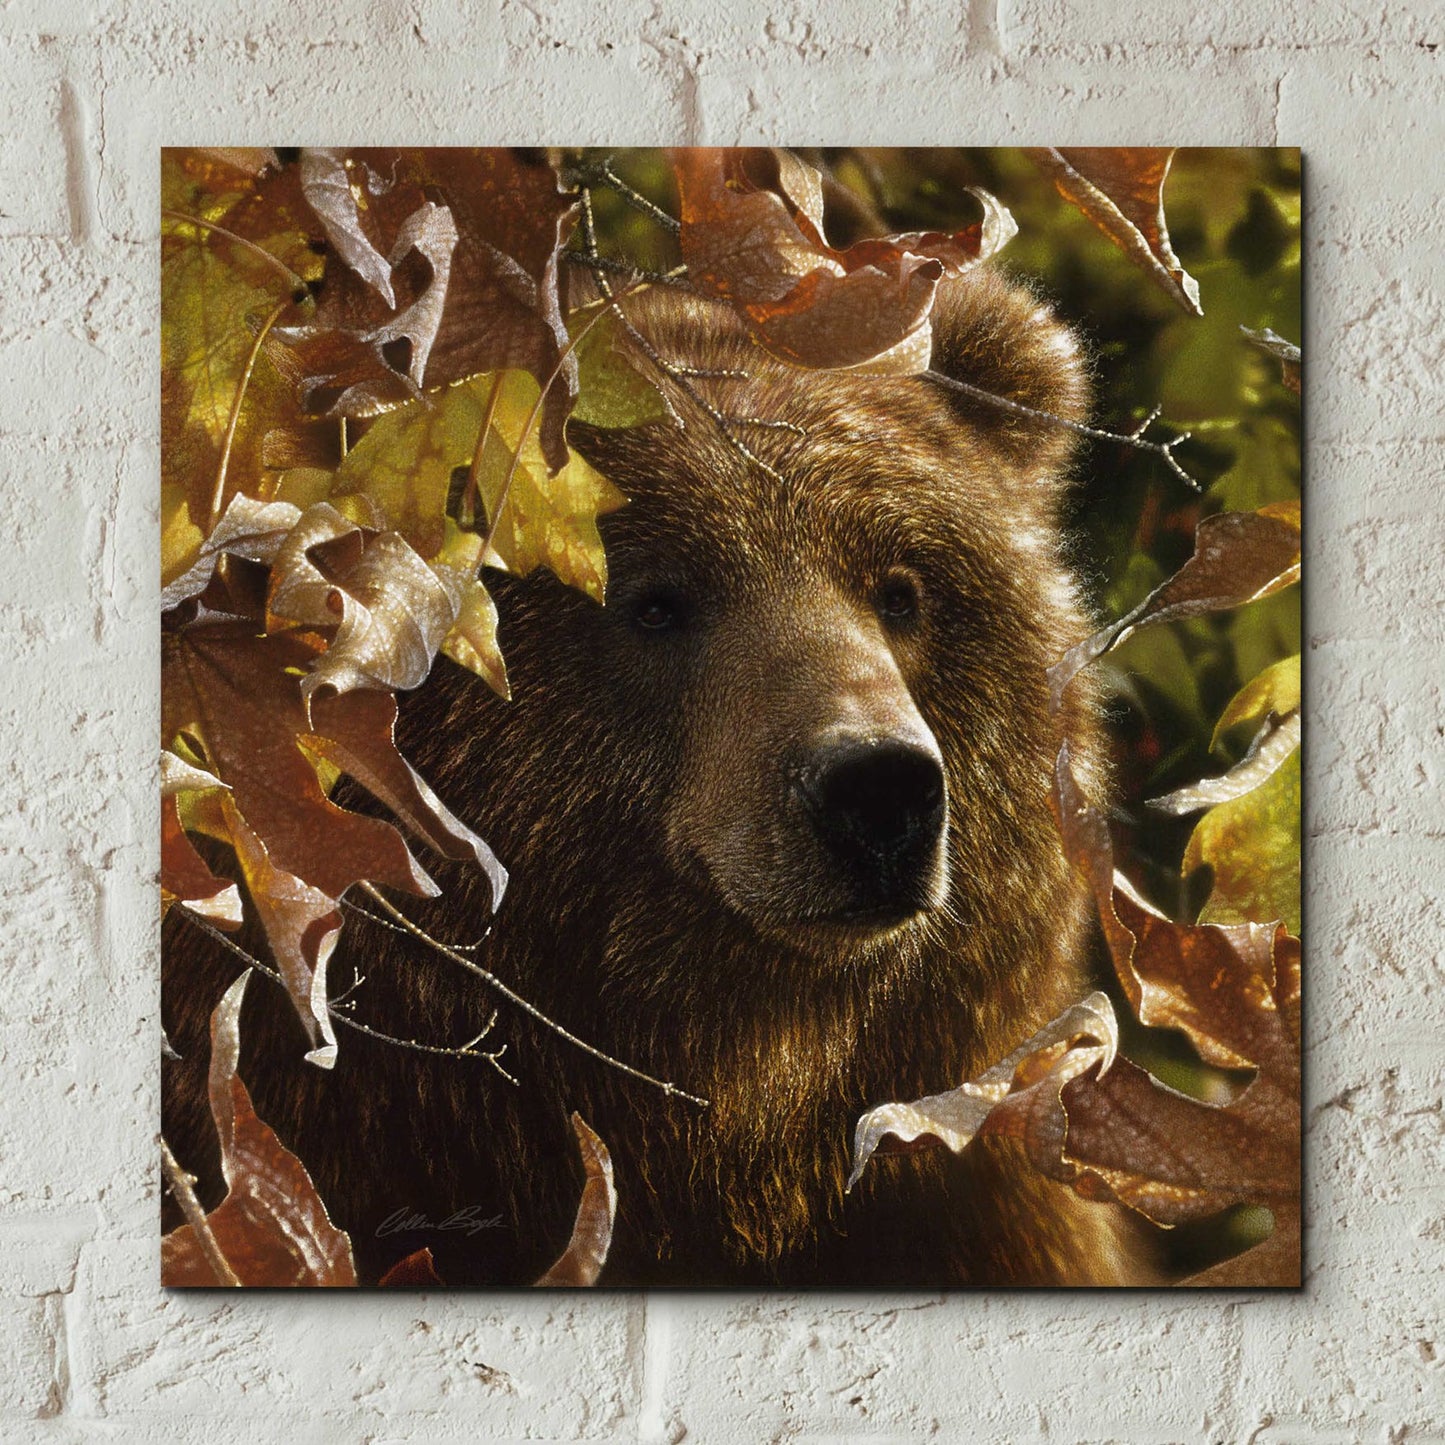 Epic Art 'Legend Of The Fall' by Collin Bogle Acrylic Glass Wall Art,12x12